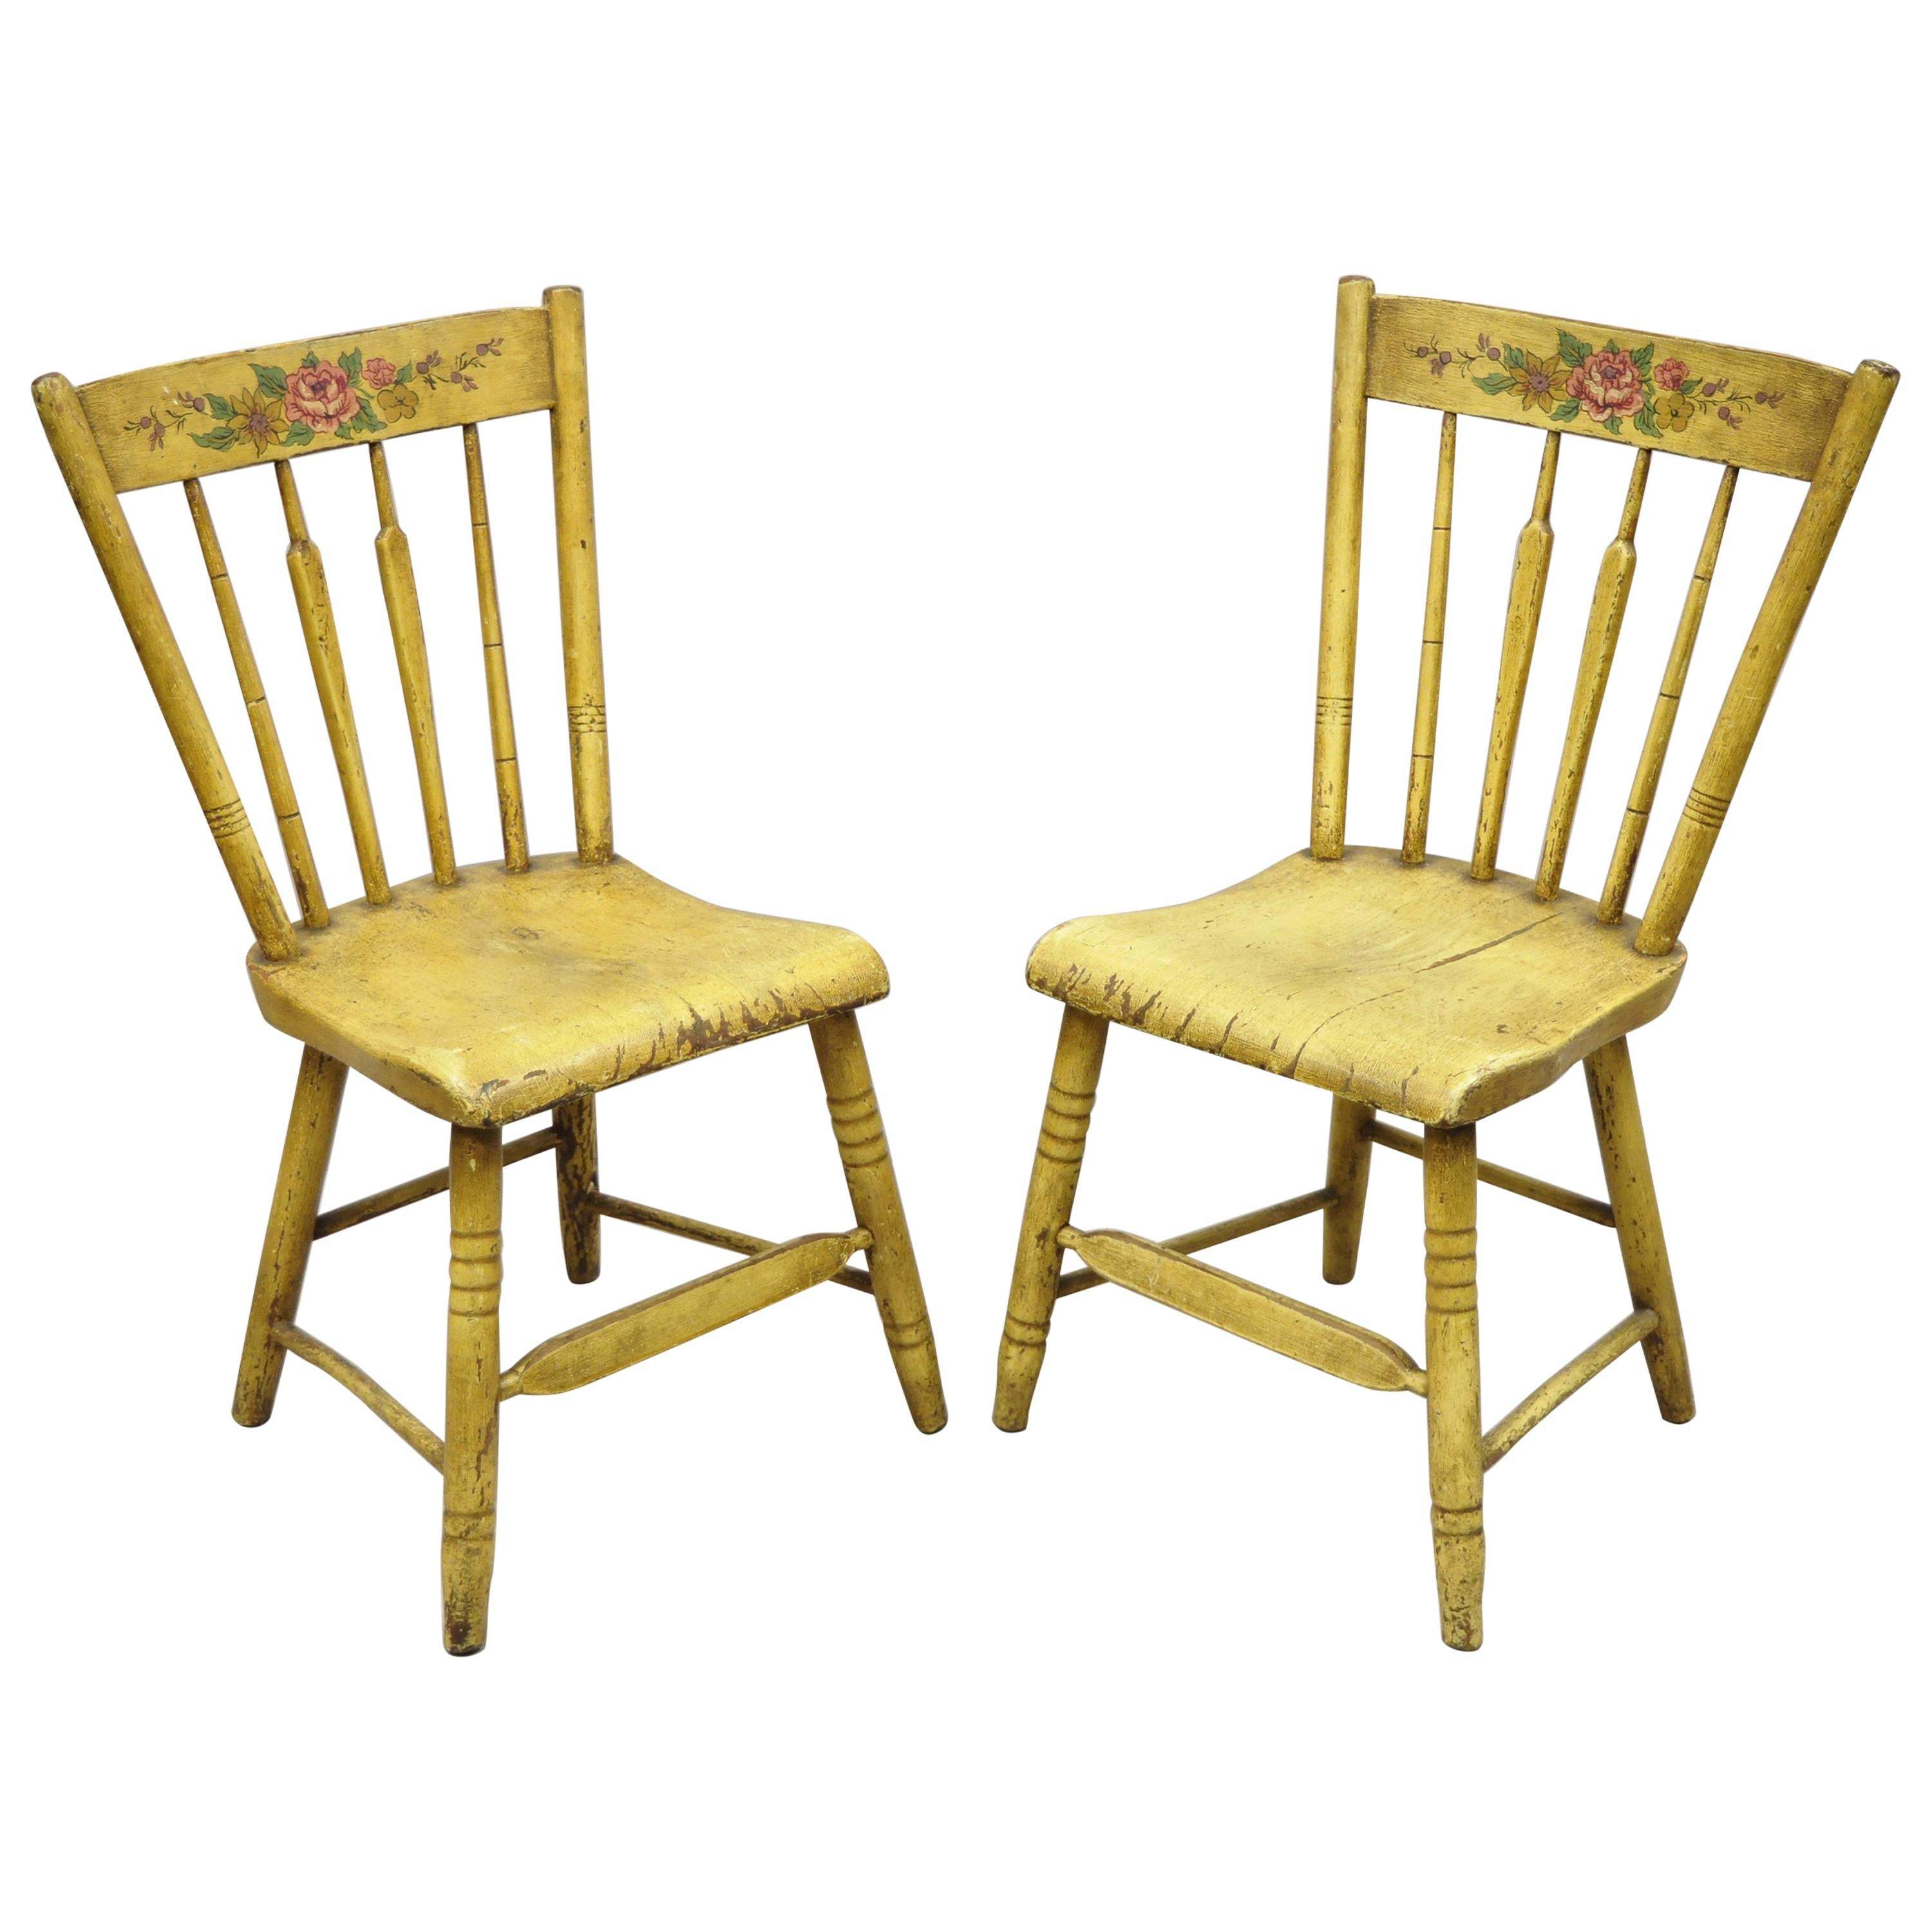 Frederick Loeser & Co Yellow Primitive Hitchcock Style Side Chairs, Pair 'B' For Sale